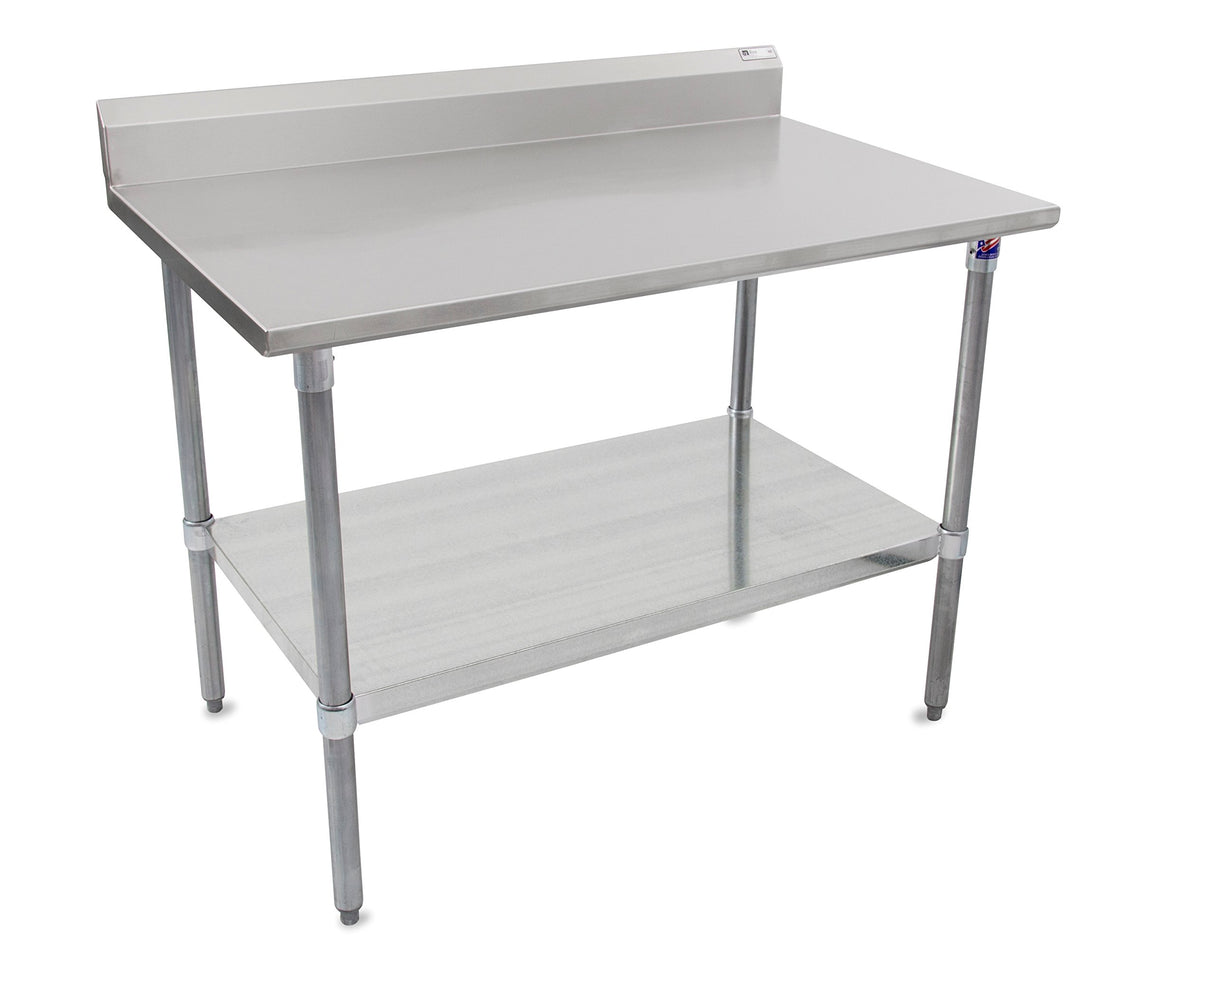 John Boos ST6R5-3060GSK Stallion Stainless Steel 5" Riser Top Work Table with Adjustable Galvanized Lower Shelf and Legs, 60" Length x 30" Width